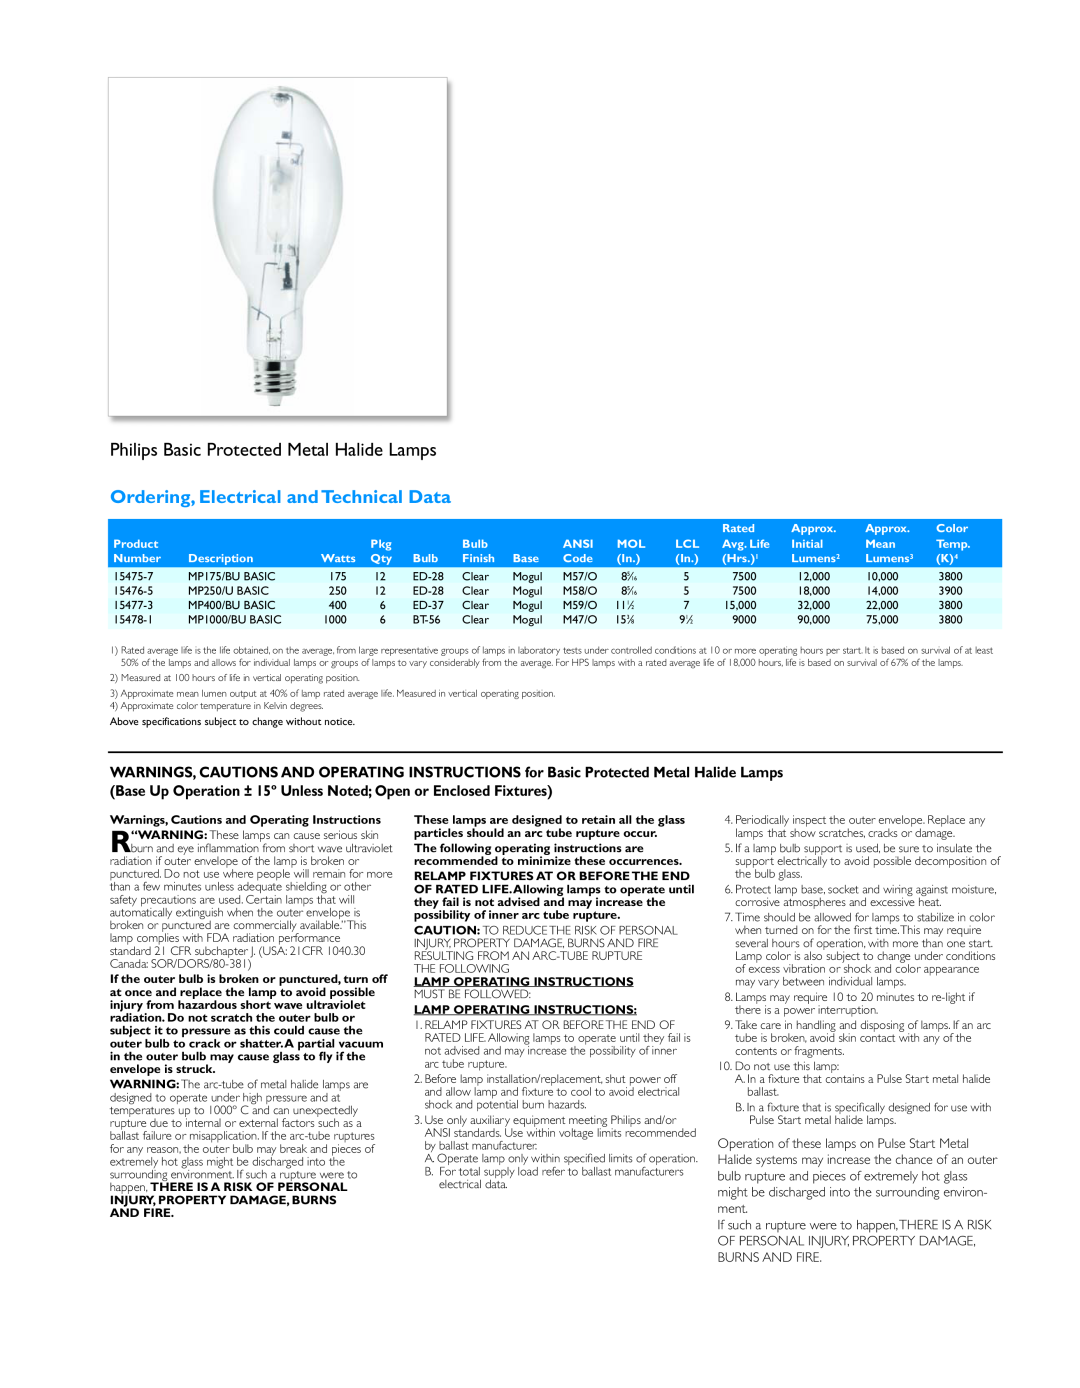 Philips Basic HID Lamp manual Philips Basic Protected Metal Halide Lamps, Ordering, Electrical and Technical Data 